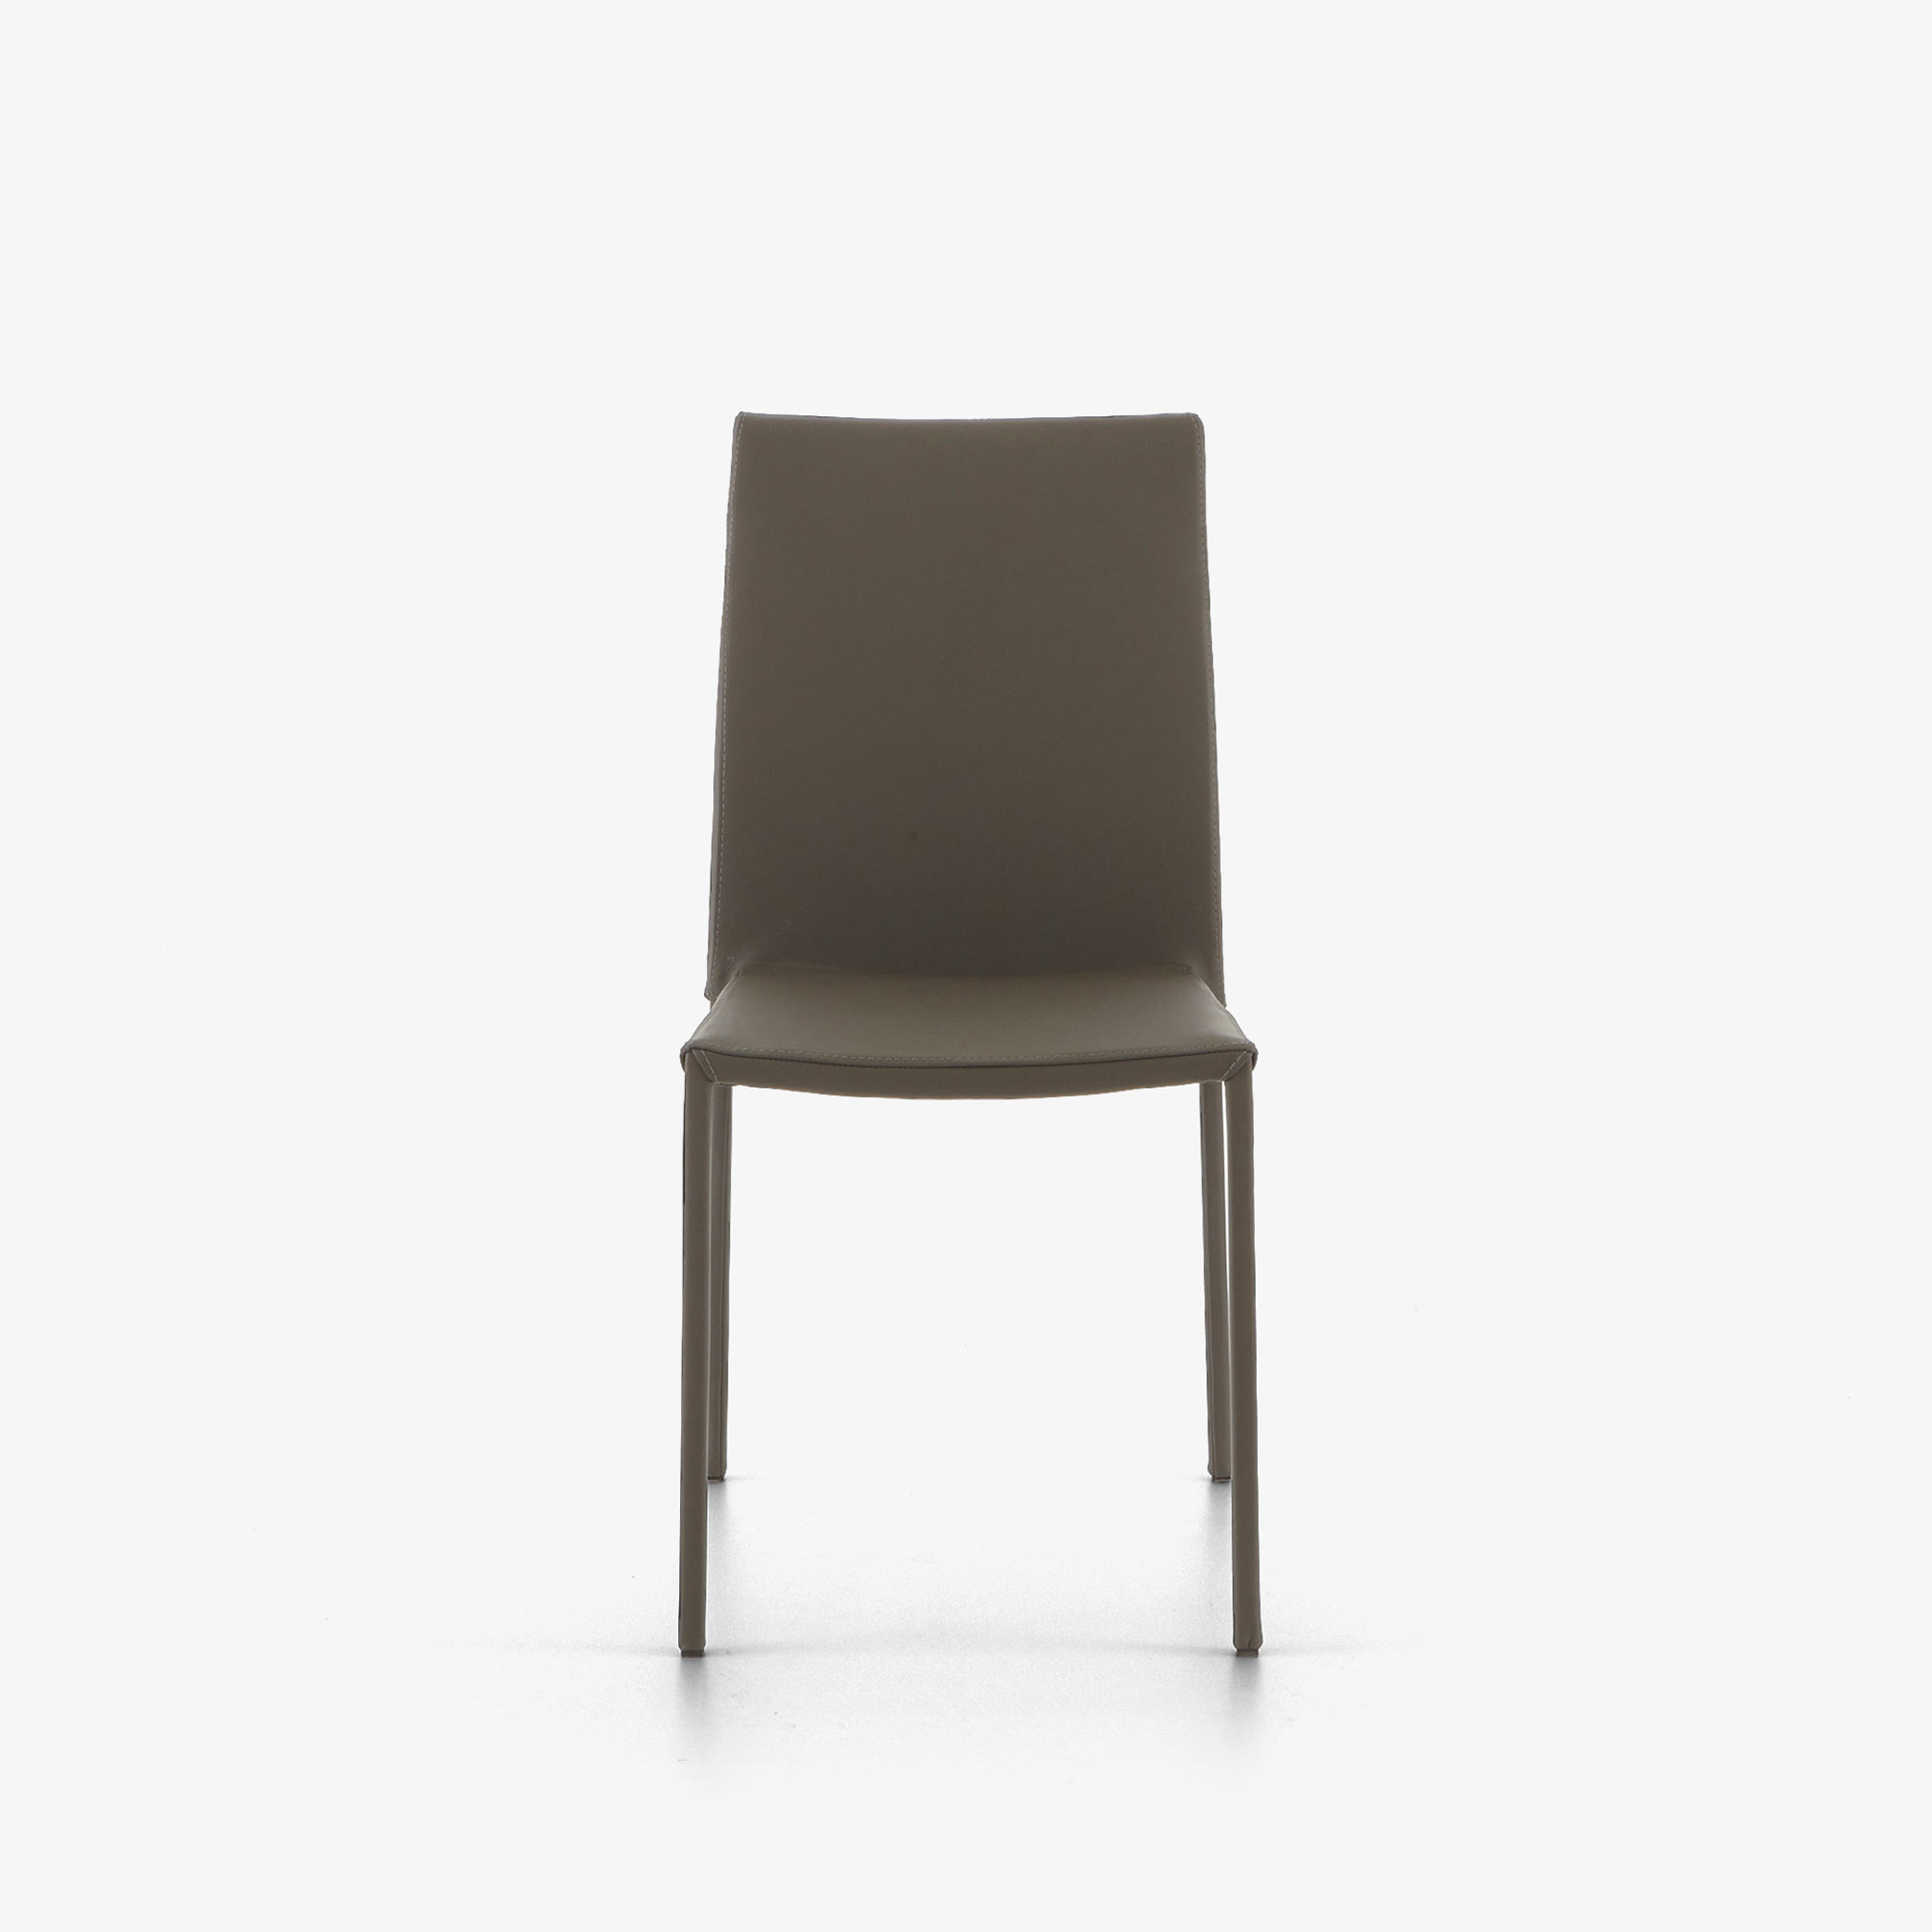 Image CHAIR GREY LEATHER 